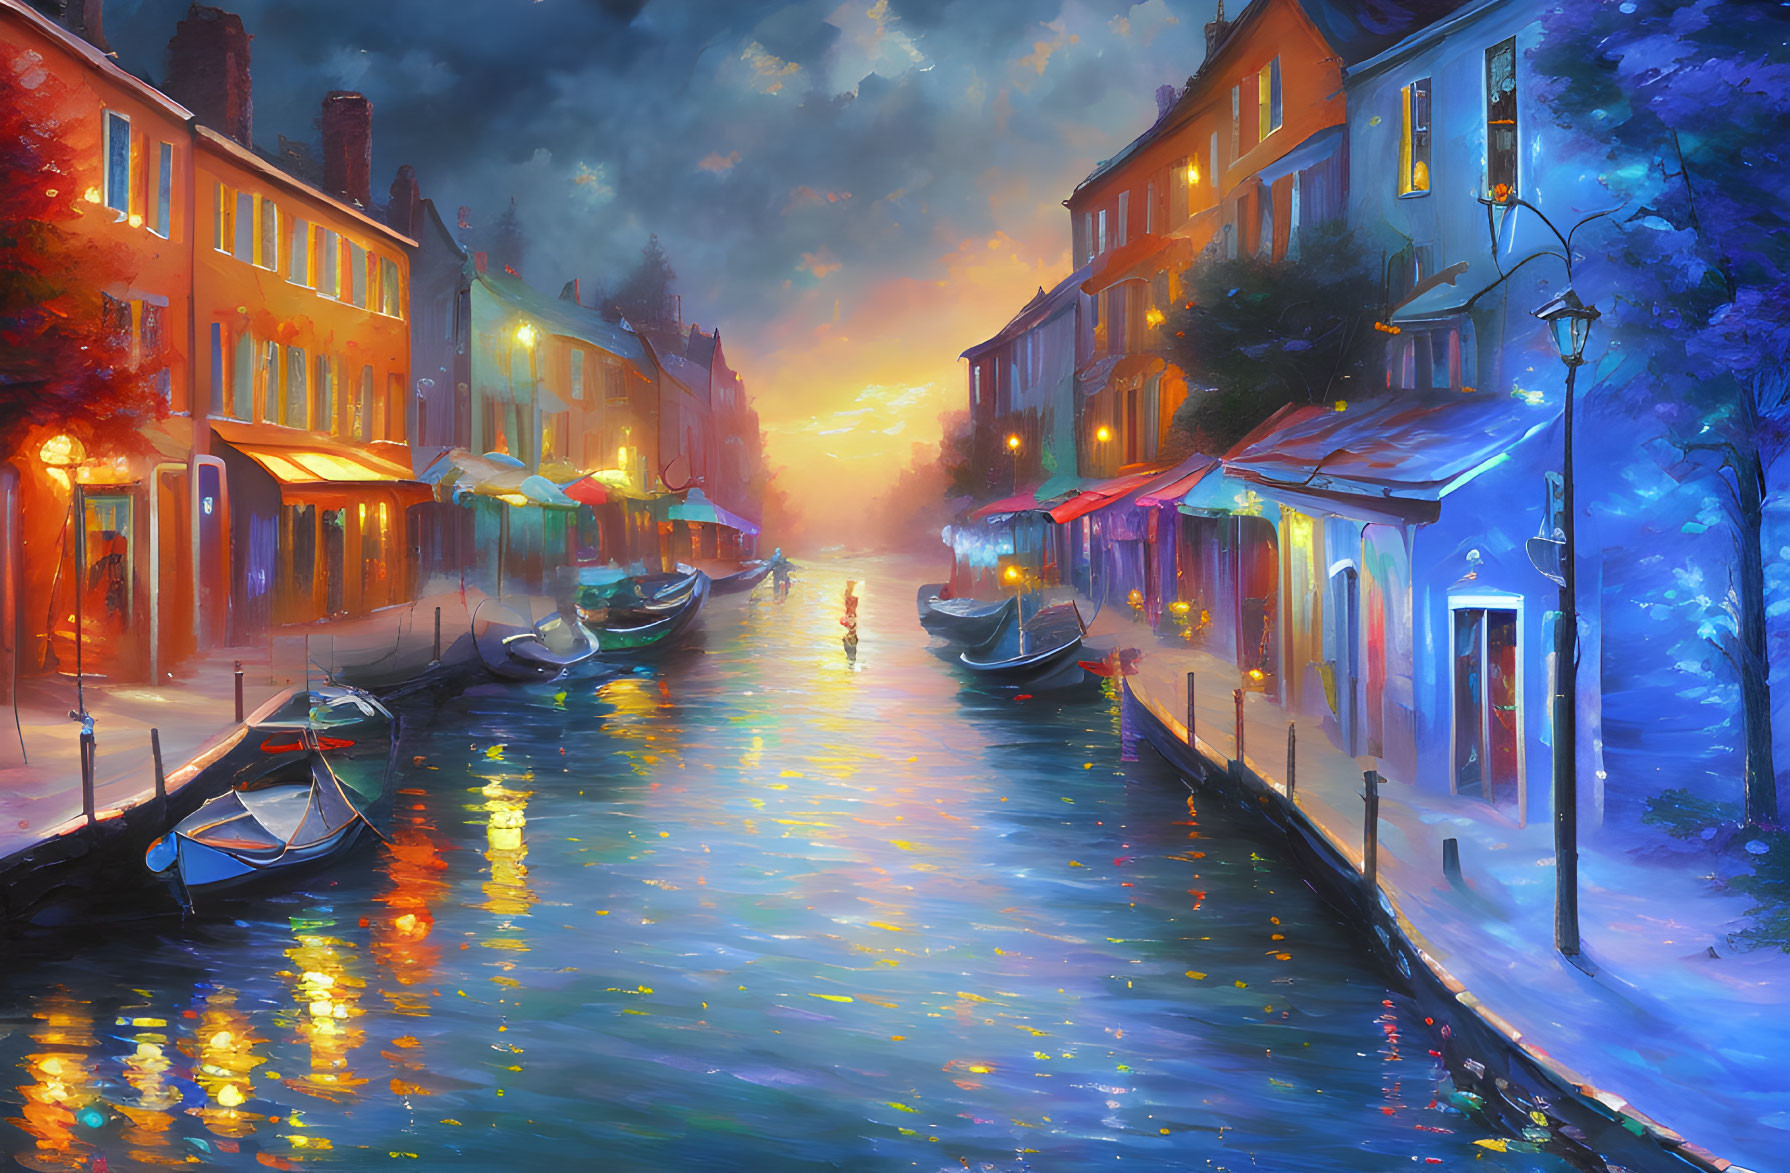 Venetian canal painting at sunset with gondolas and illuminated buildings